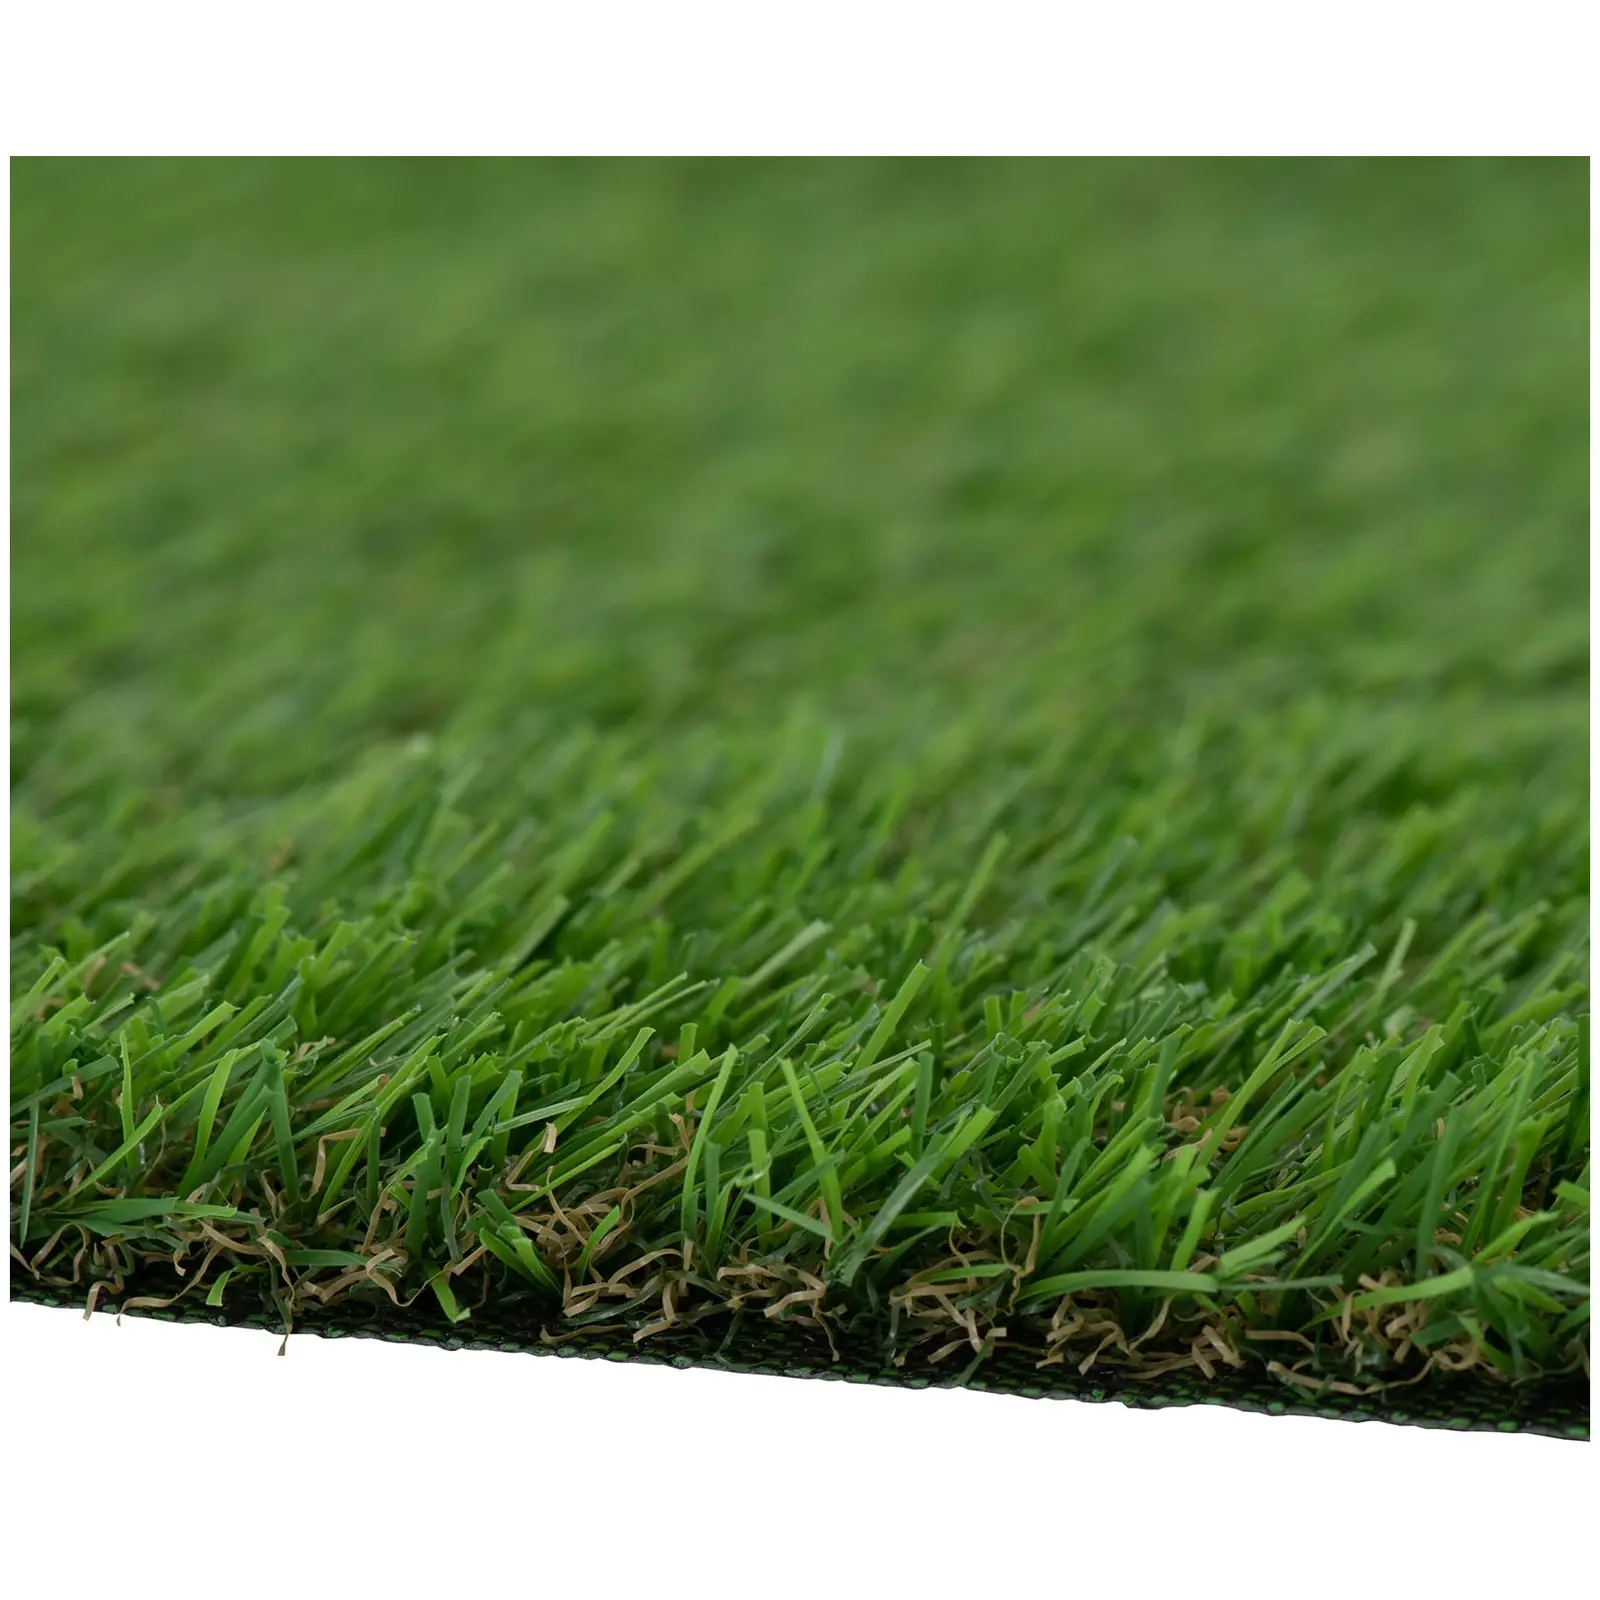 Artificial grass - Set of 5 - 100 x 100 cm - Height: 20 mm - Stitch rate: 13/10 cm - UV-resistant